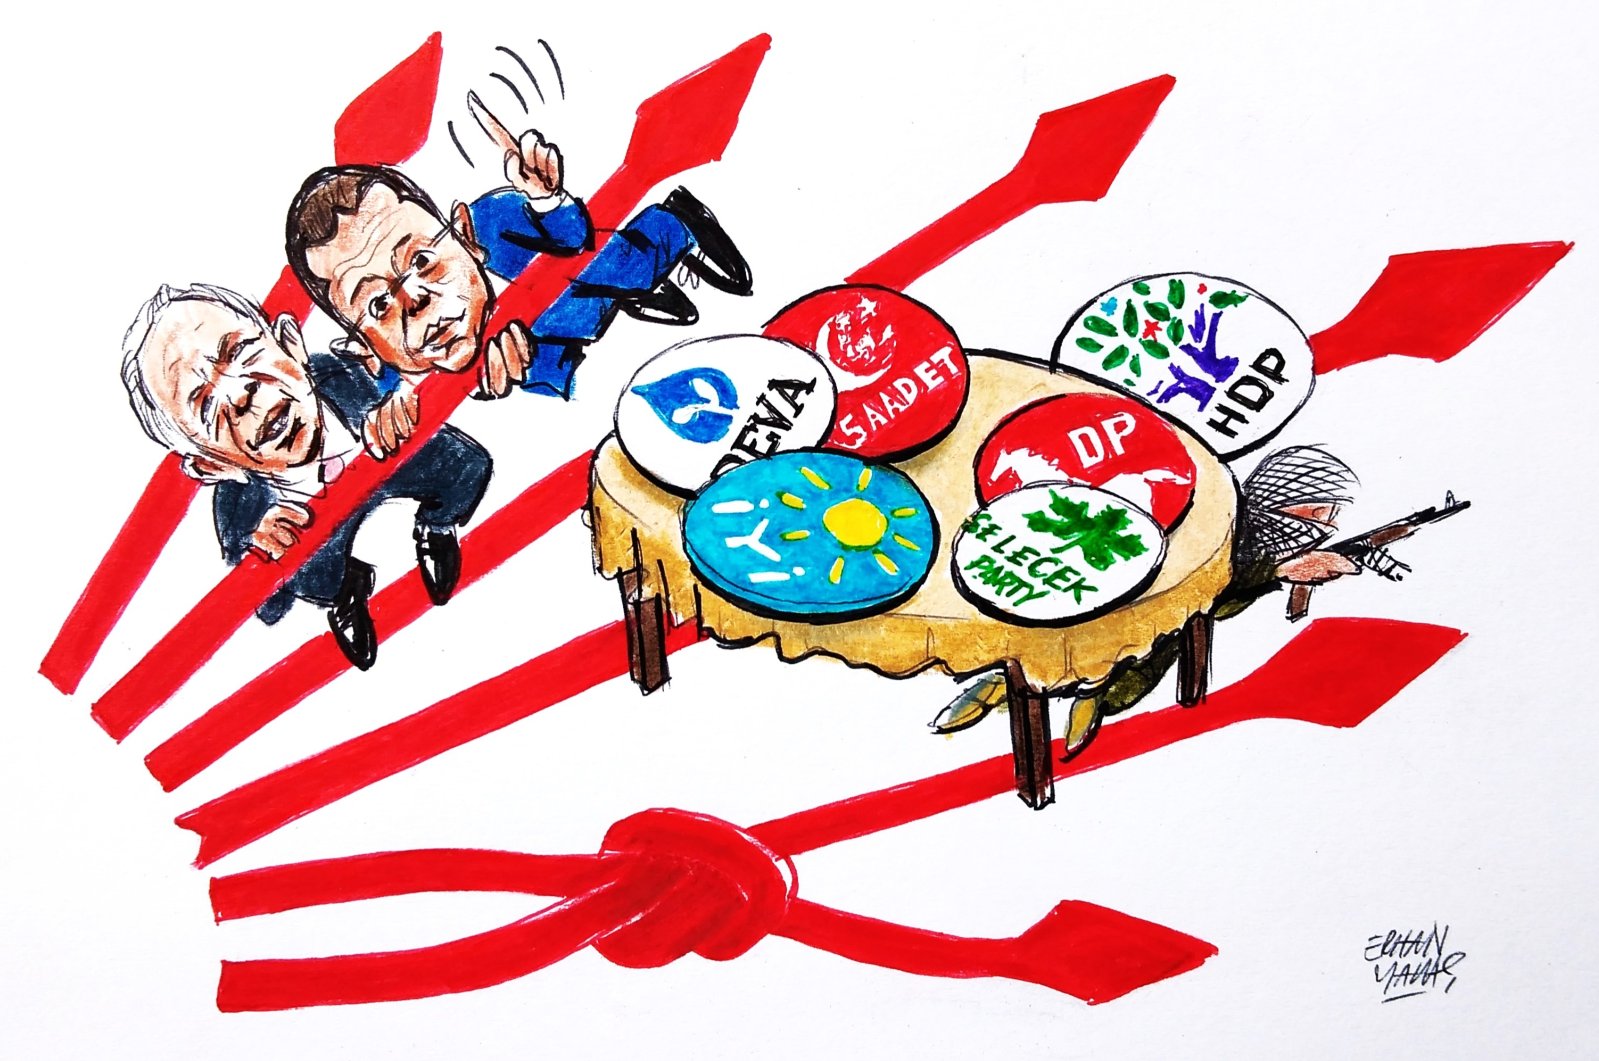 &quot;The war of words between the Good Party (IP) and the CHP’s mayoral candidates in Istanbul and Ankara (over the reluctance of those politicians to run for president last year) will not end until the municipal election.&quot; (Illustration by Erhan Yalvaç)